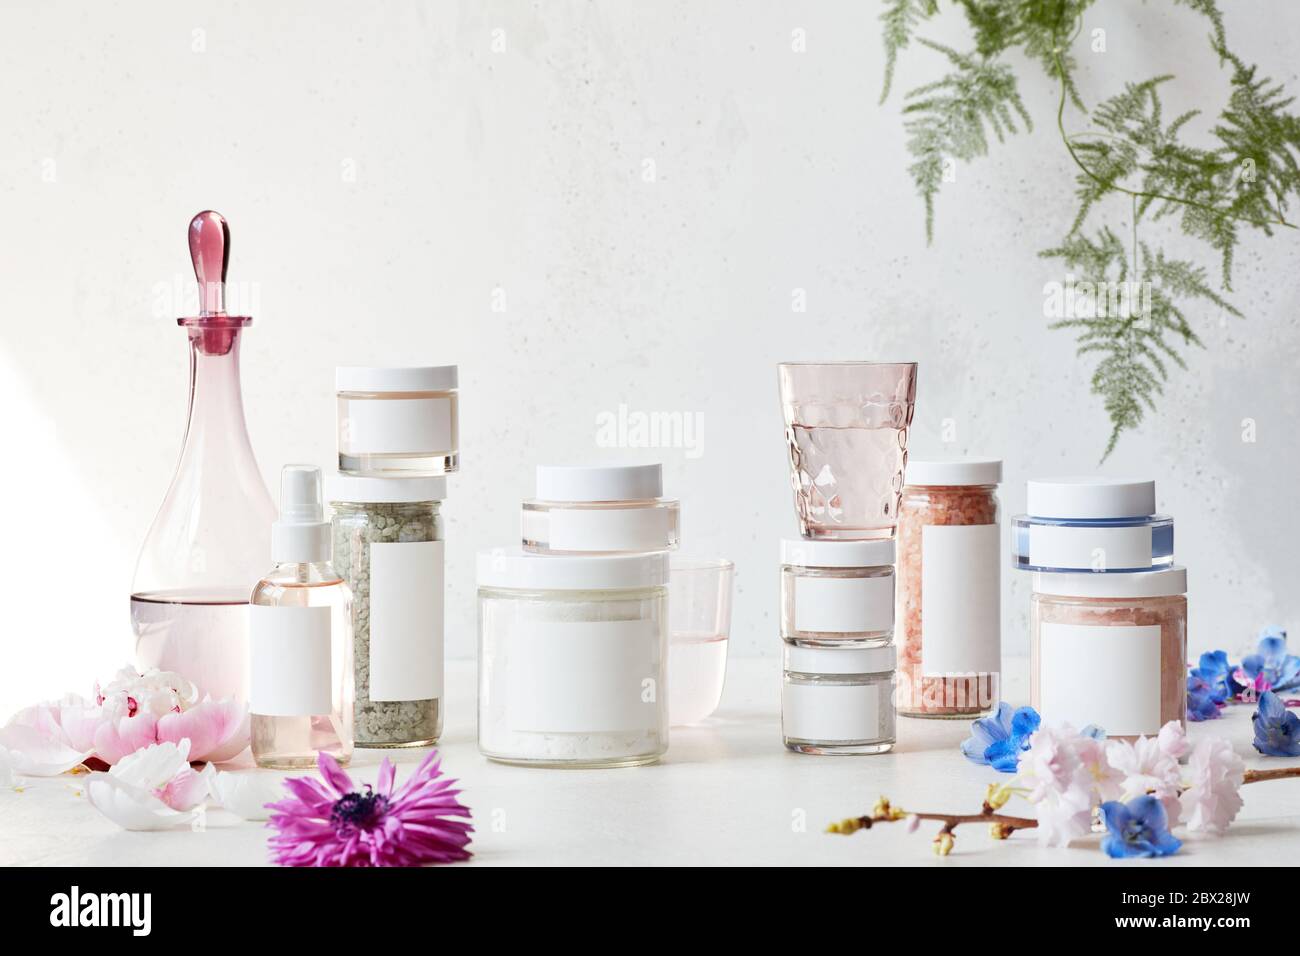 Still life display of skin care products Stock Photo